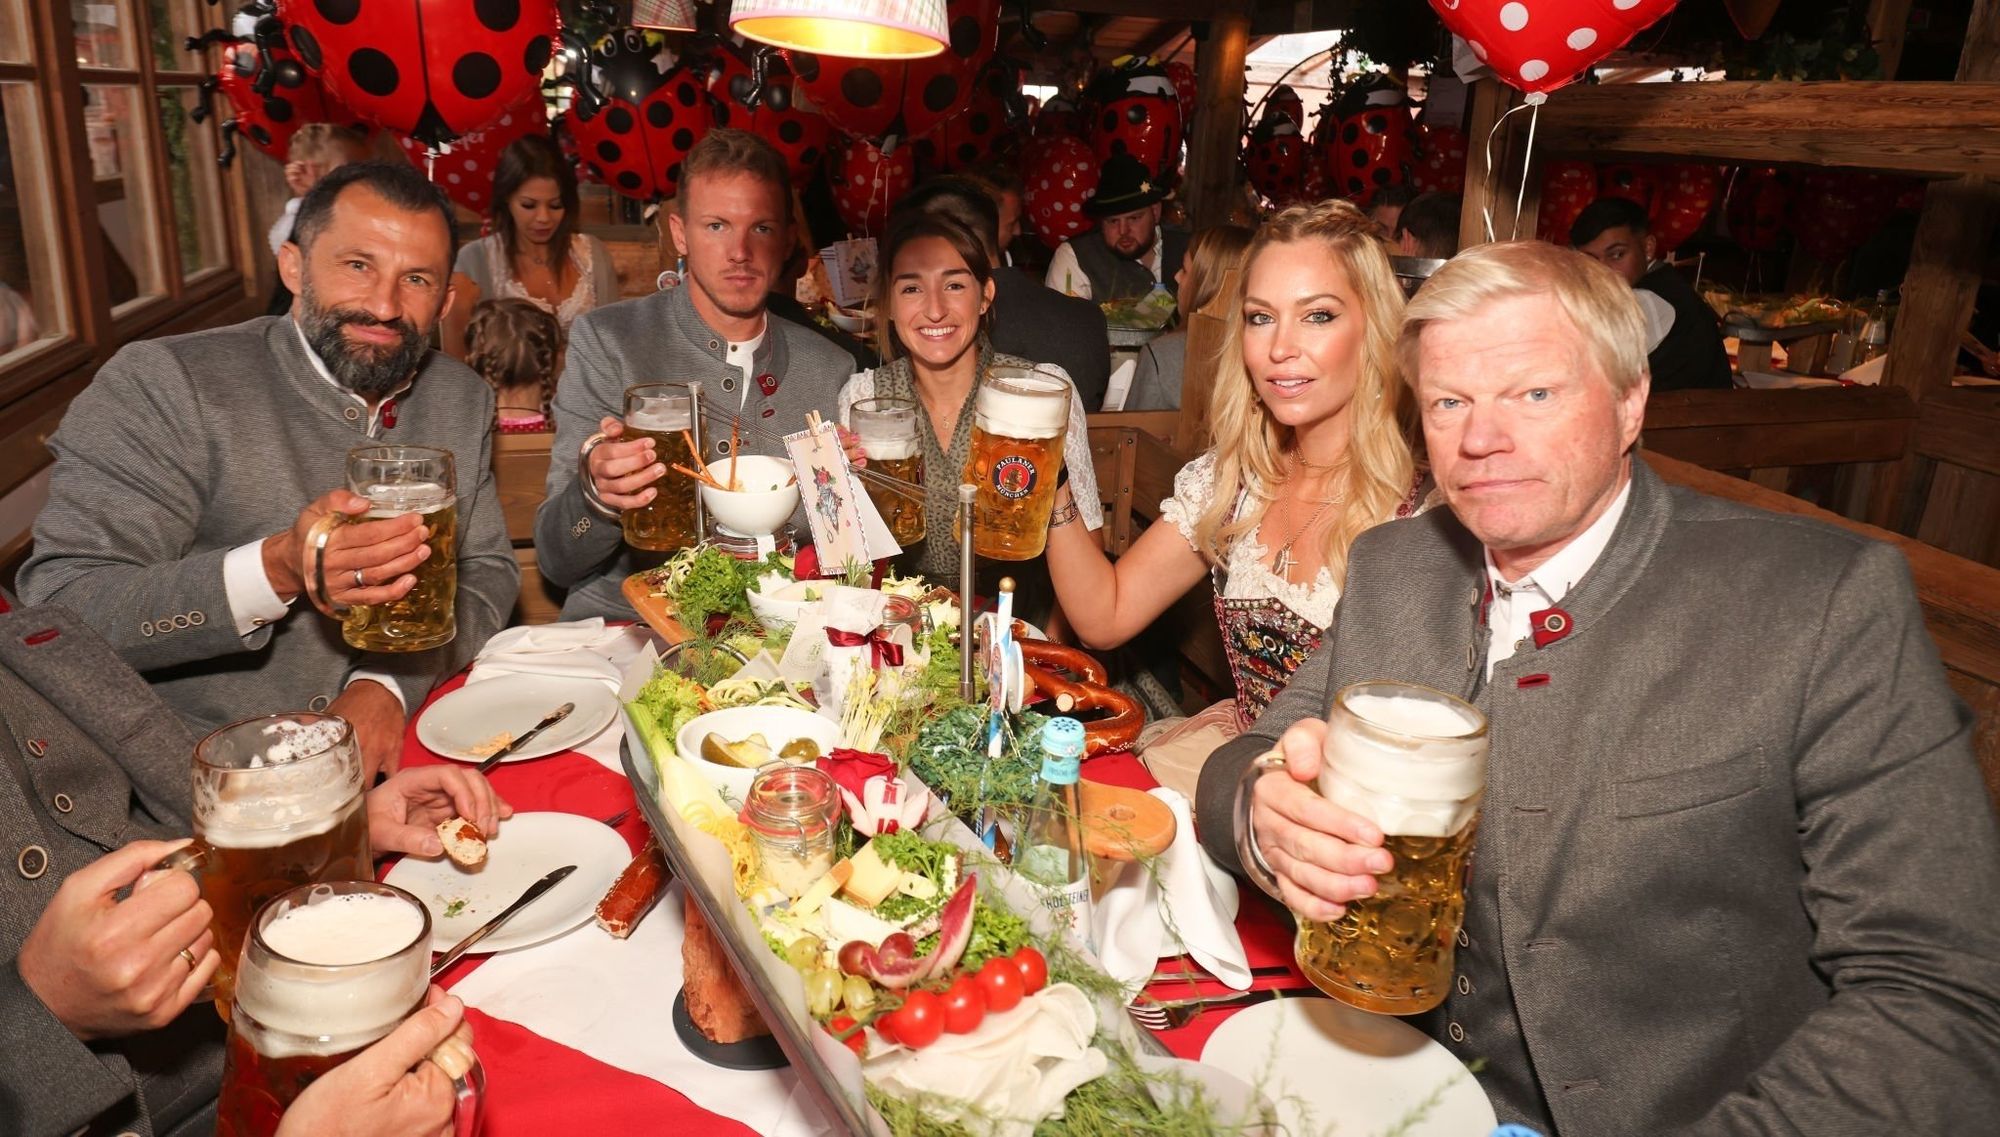 Brazzo, Nagelsmann, and Kahn look uncomfortable sitting with each other at Oktoberfest. 